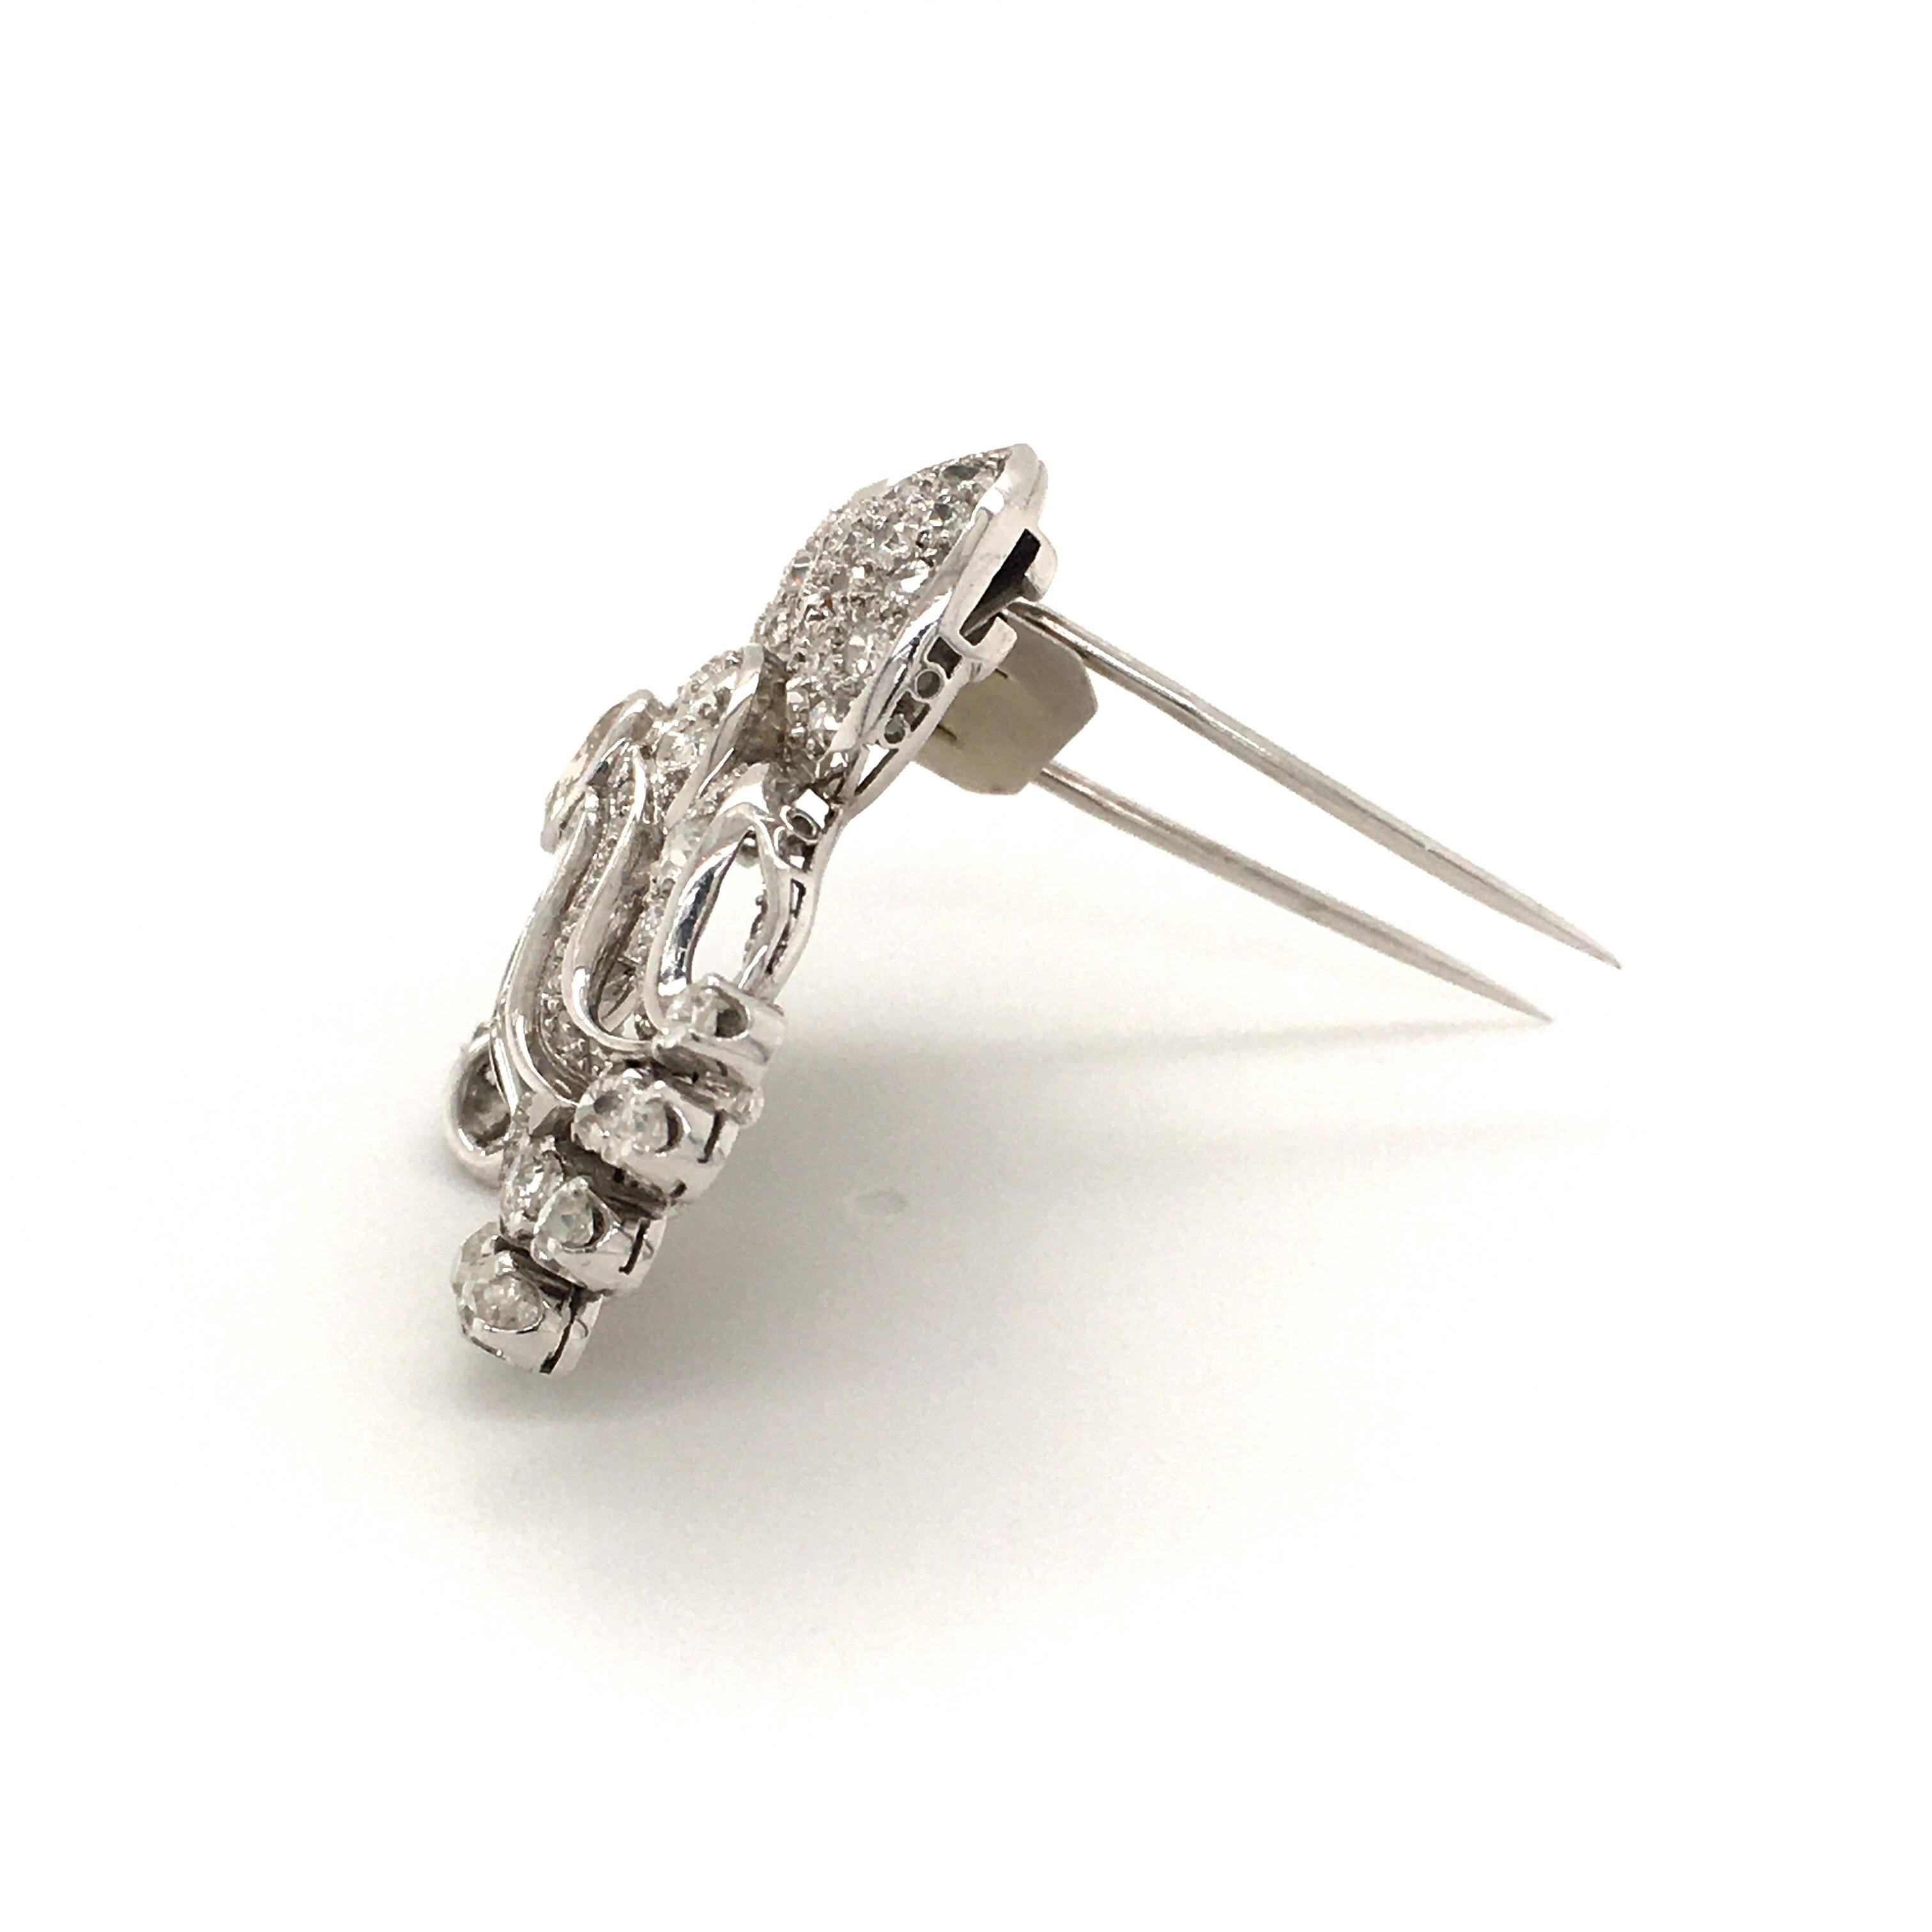 Old Mine Cut Flower Clip with Old Cut Diamonds in Platinum 950